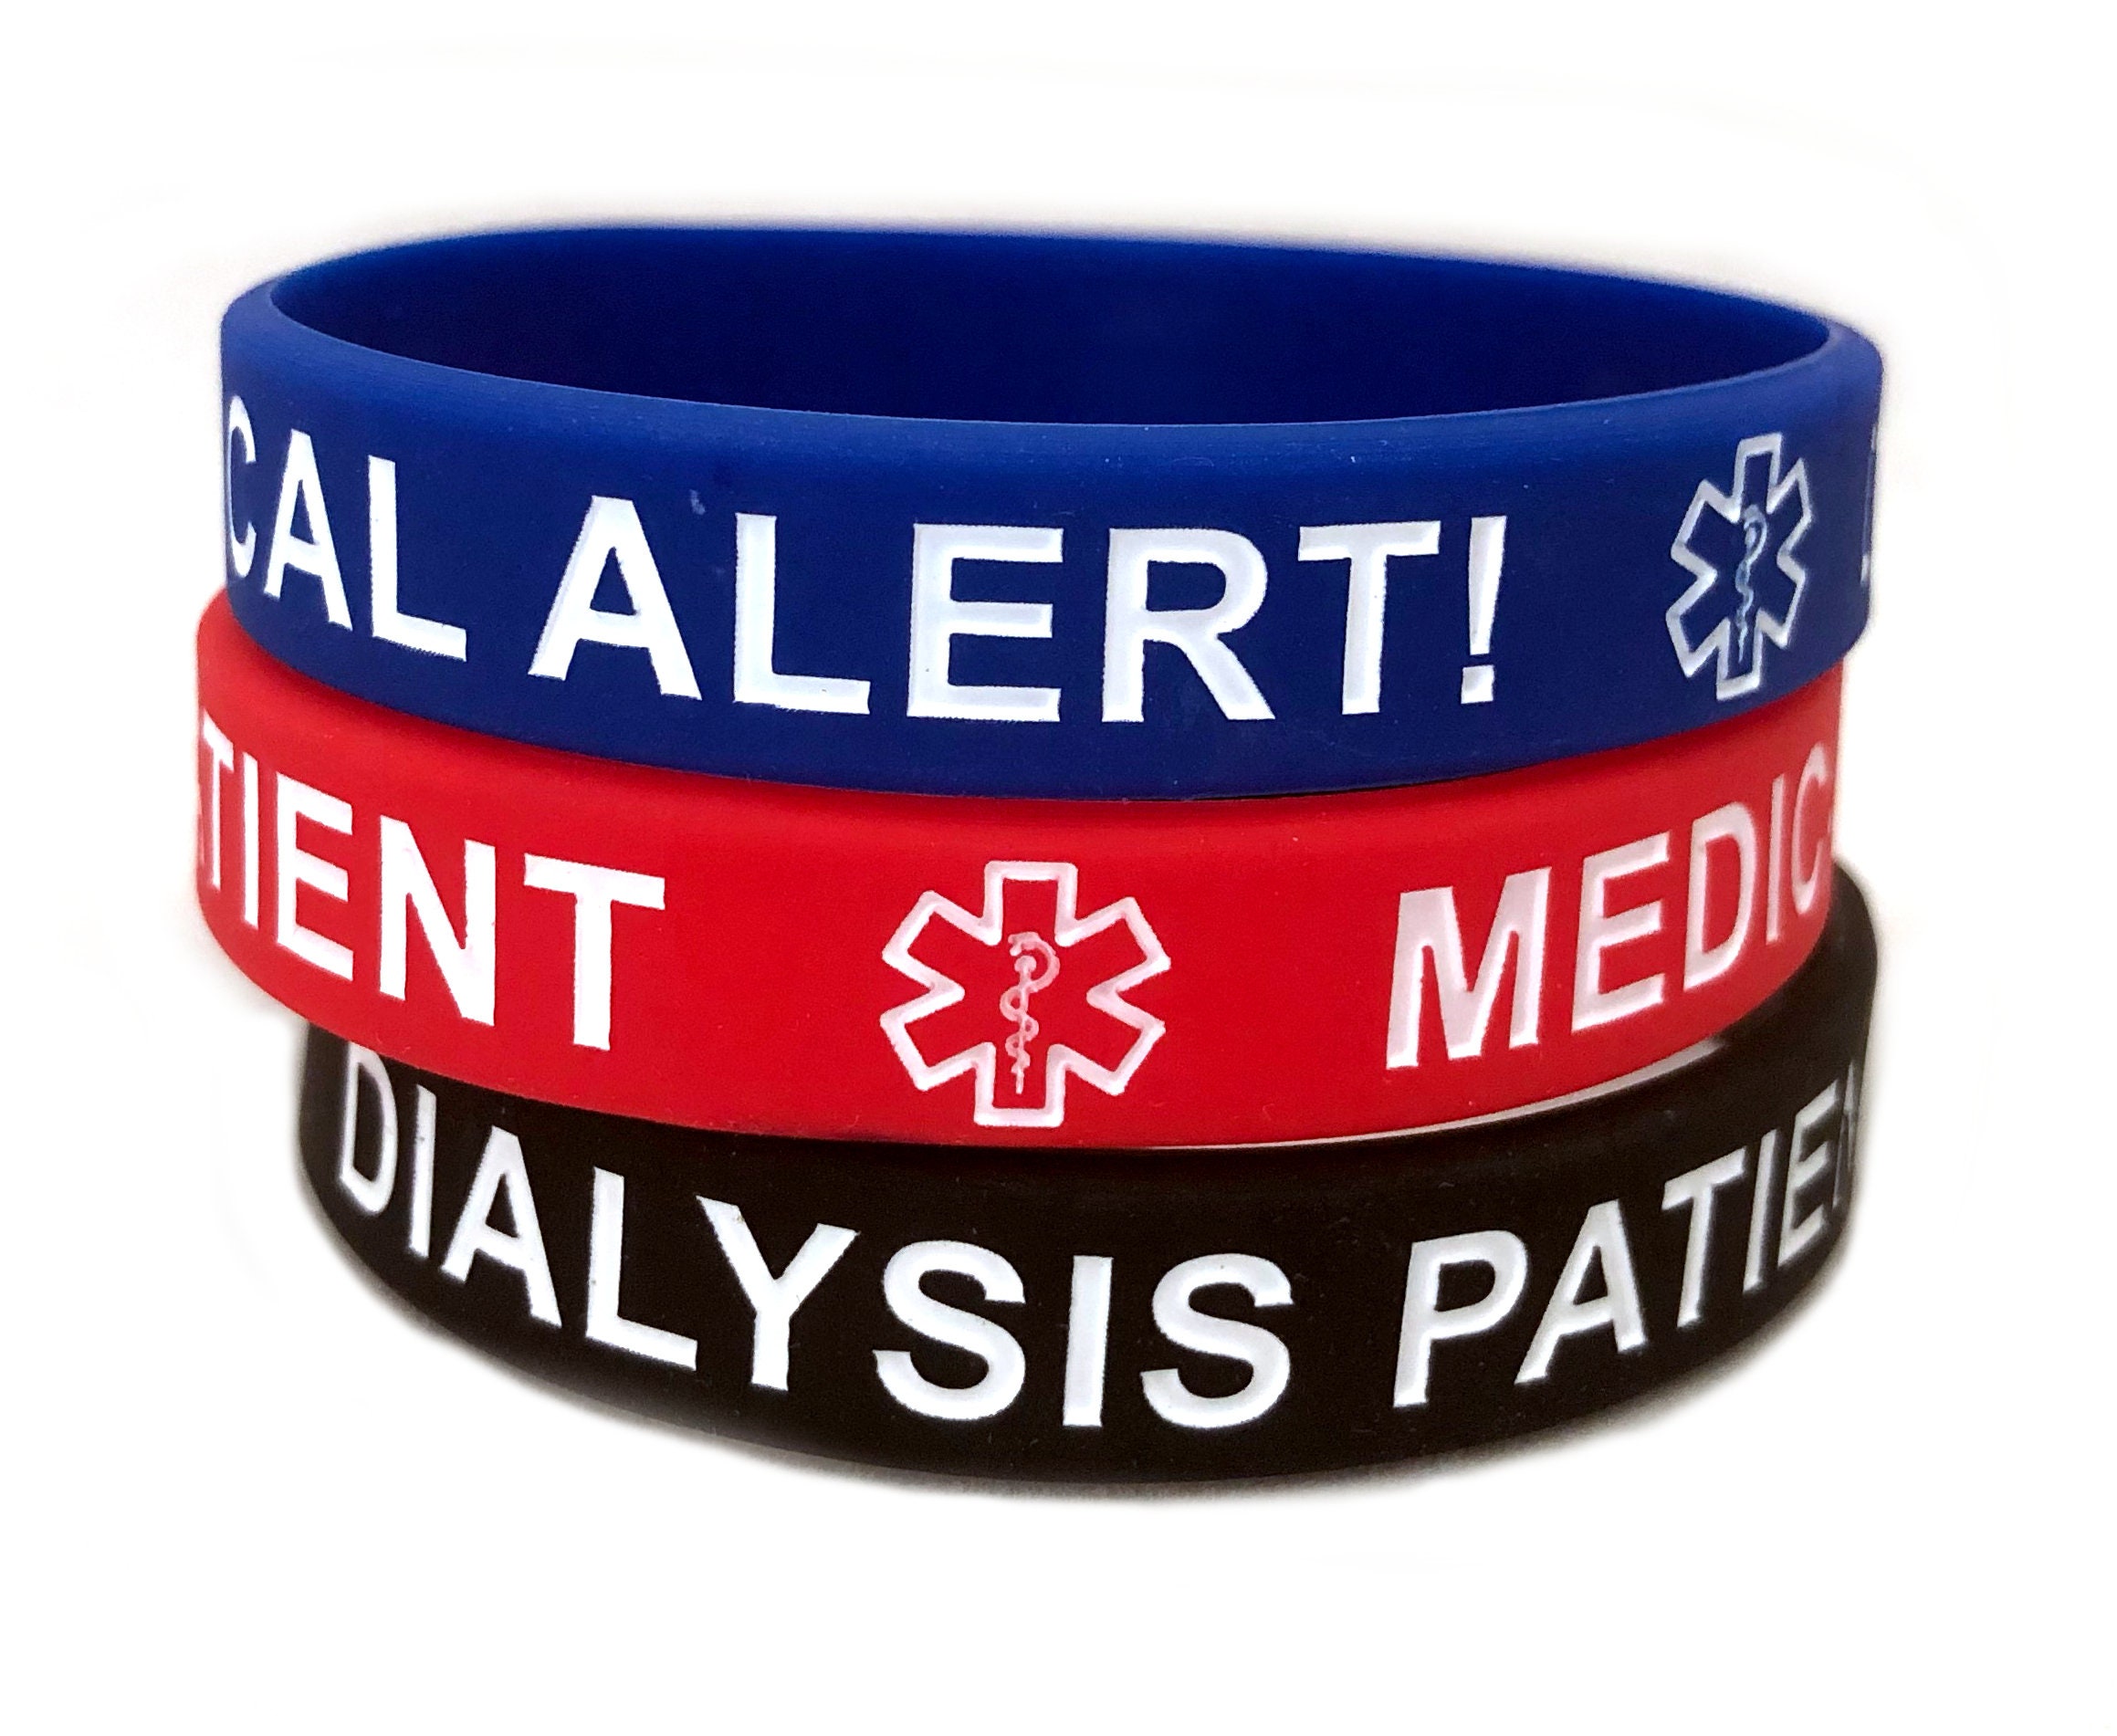 Dialysis Patient Adult Silicone Medical Alert Bracelets Lot of - Etsy